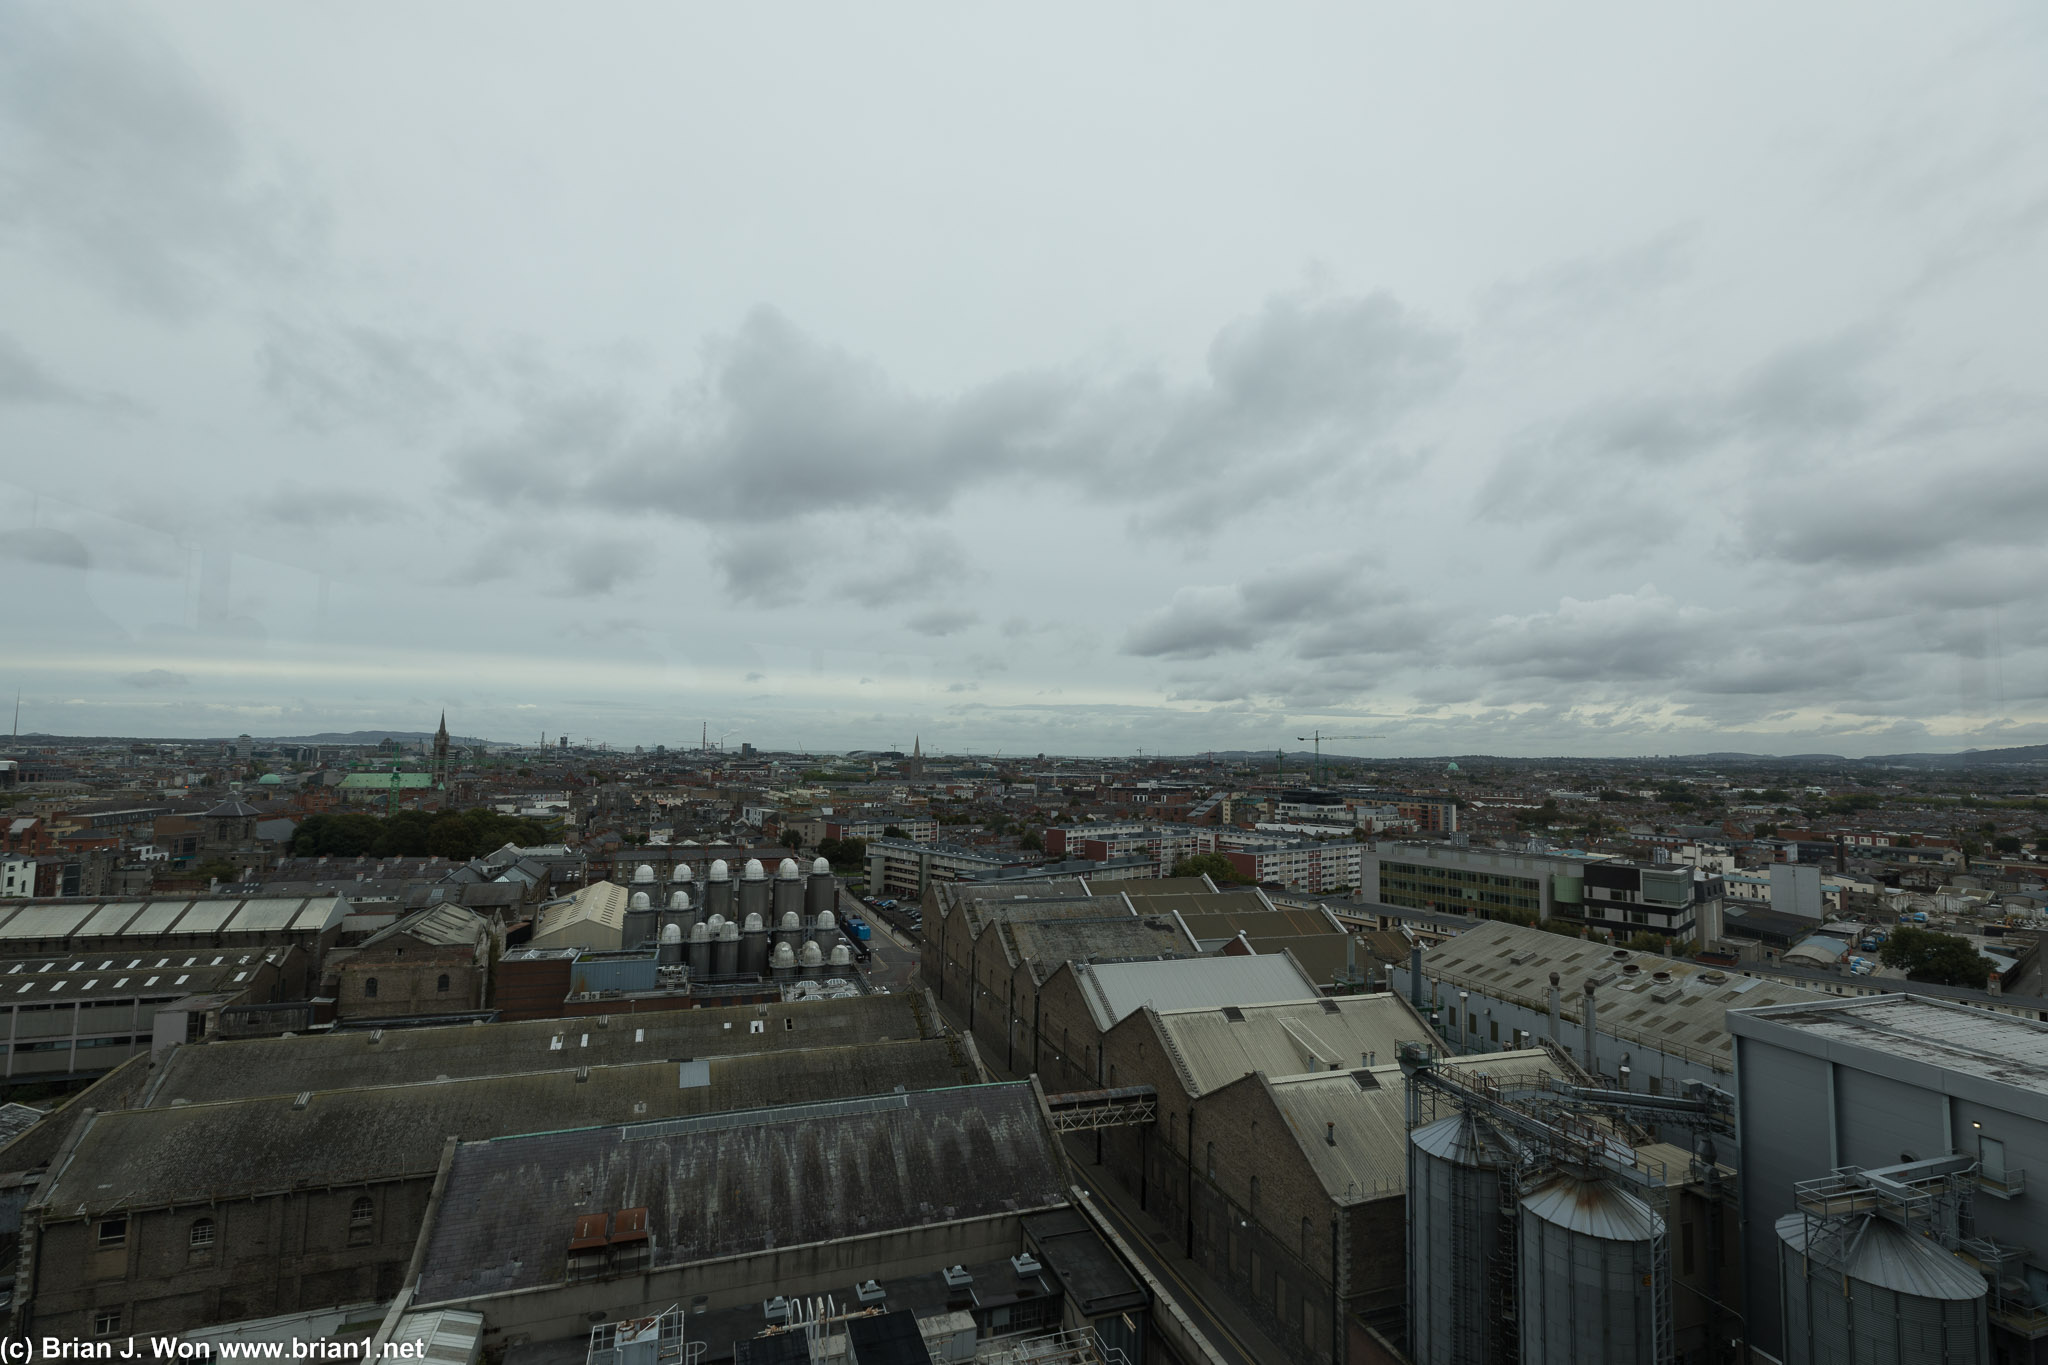 Looking out from the highest viewpoint in Dublin, Guinness' Gravity Bar.